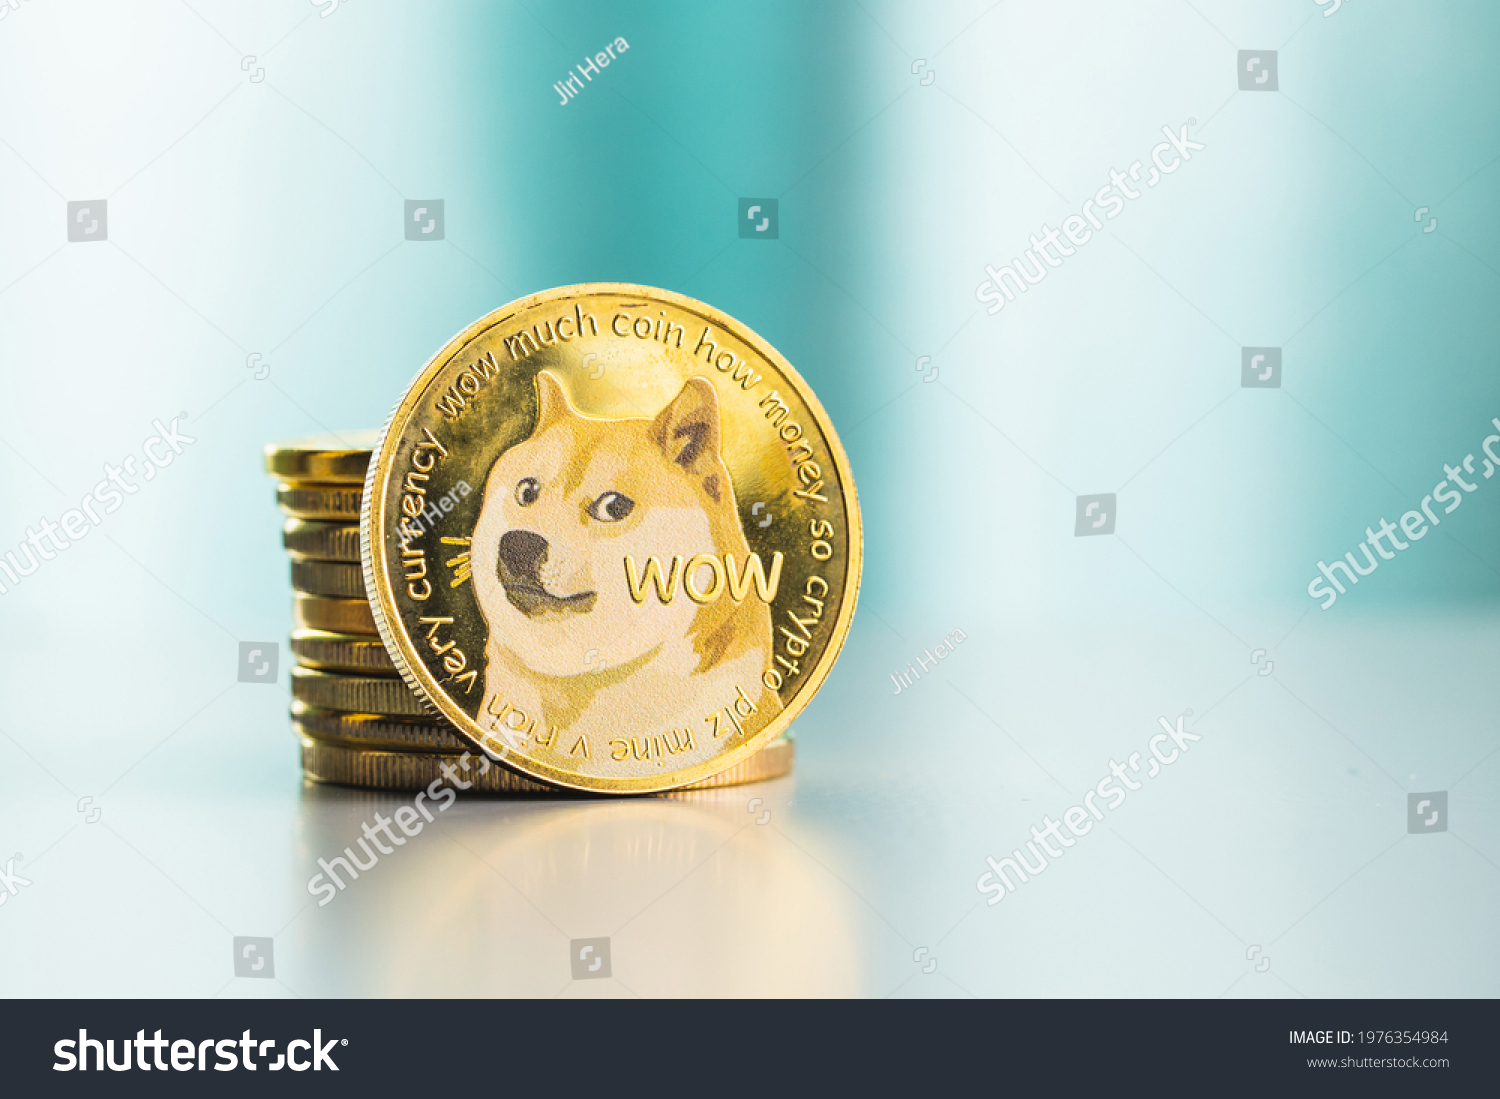 Golden dogecoin coin. Cryptocurrency dogecoin. Doge cryptocurrency. #1976354984